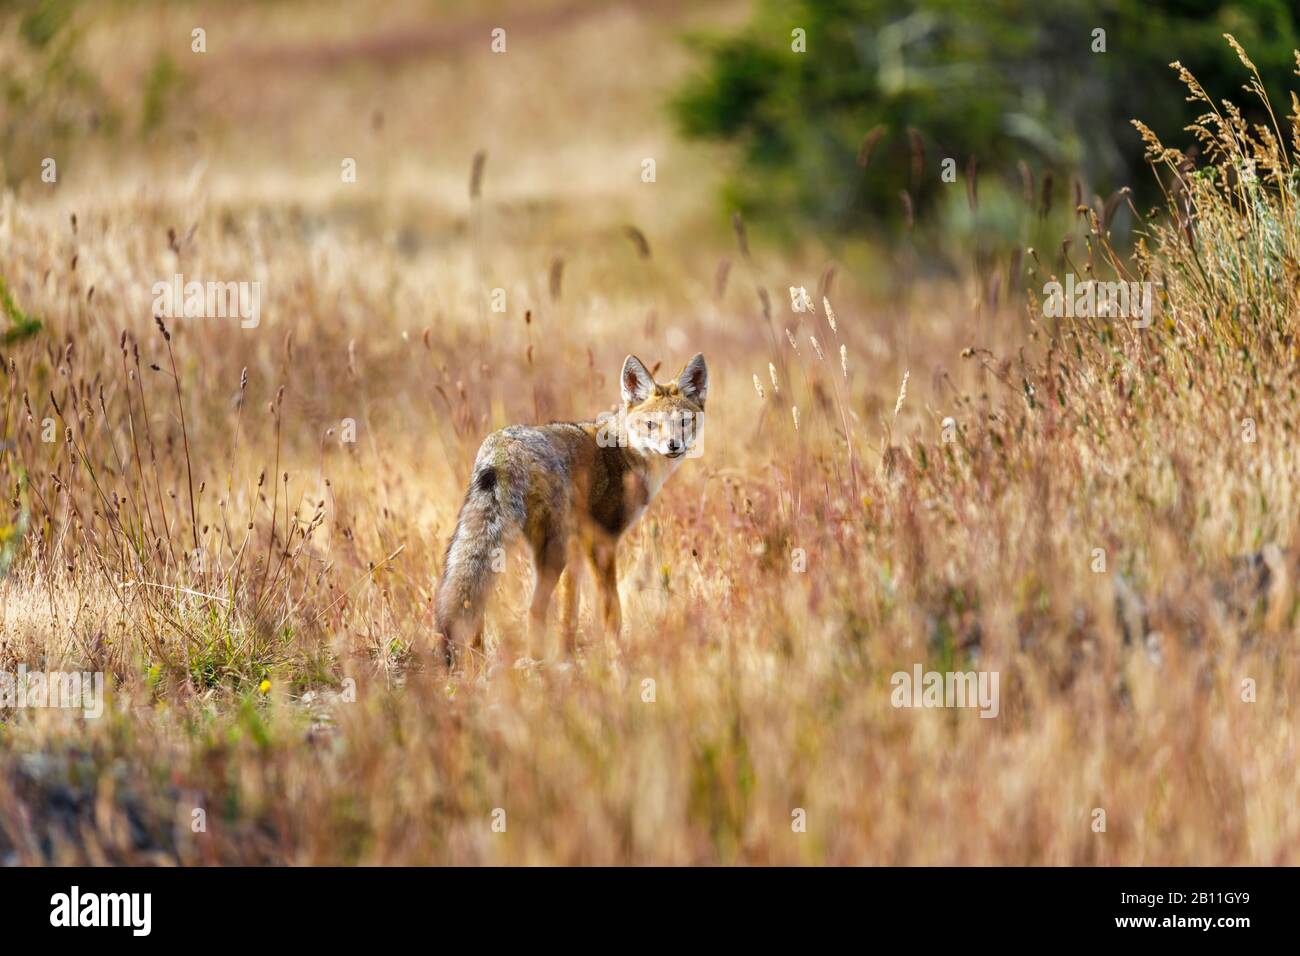 South American grey fox (Lycalopex griseus) standing in grass on Cerro Benitez, Torres del Paine National Park, Magallanes Region, southern Chile Stock Photo